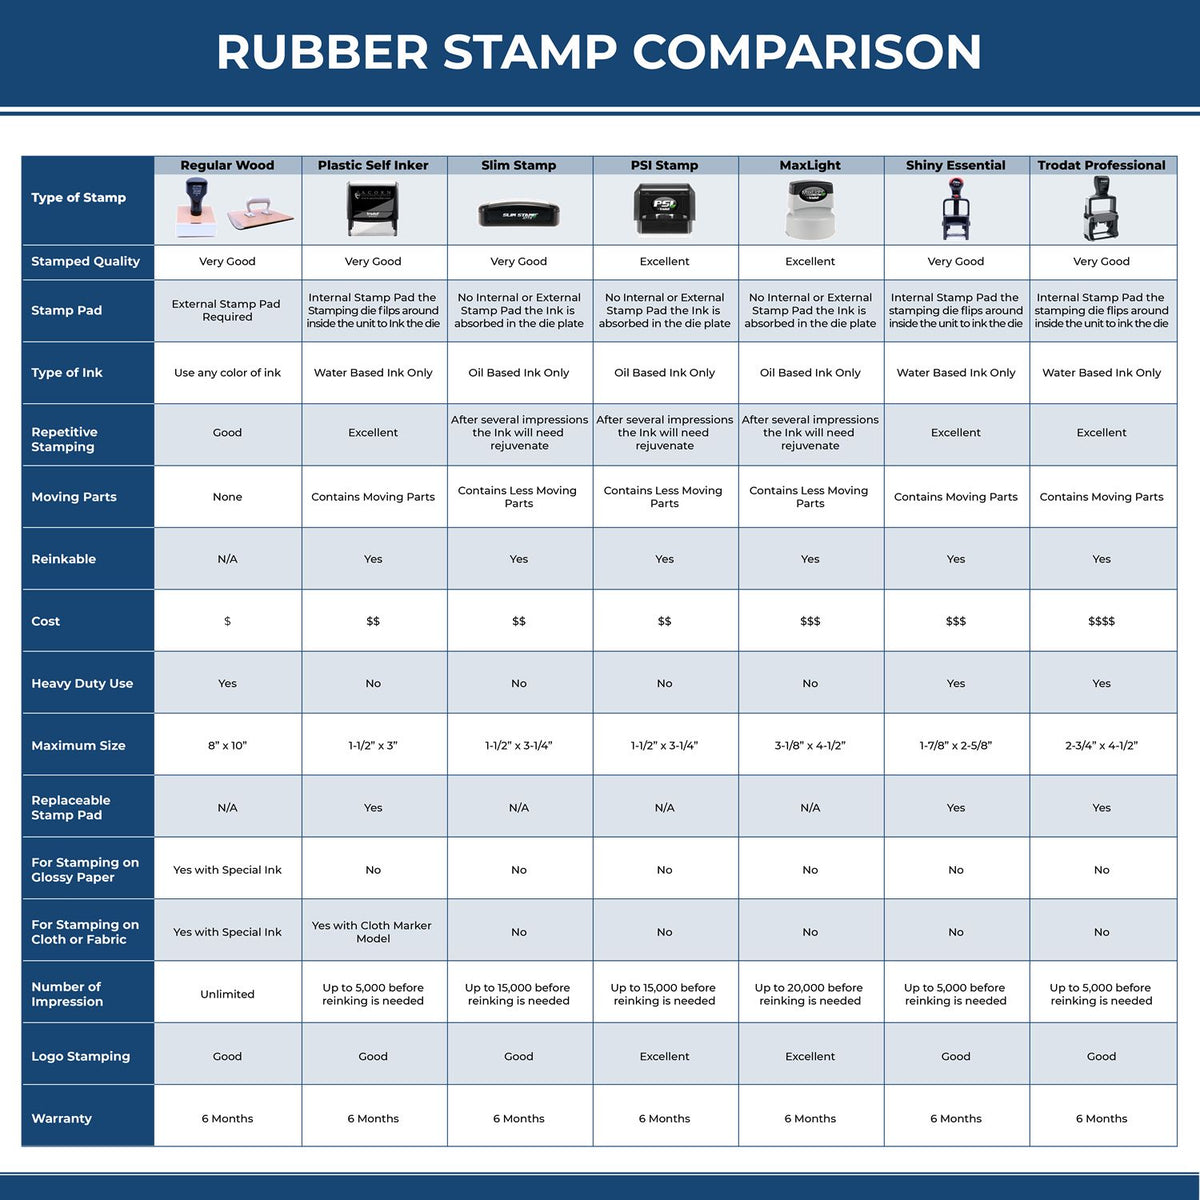 Jumbo Read And Route Xstamper Stamp 5115 Rubber Stamp Comparison